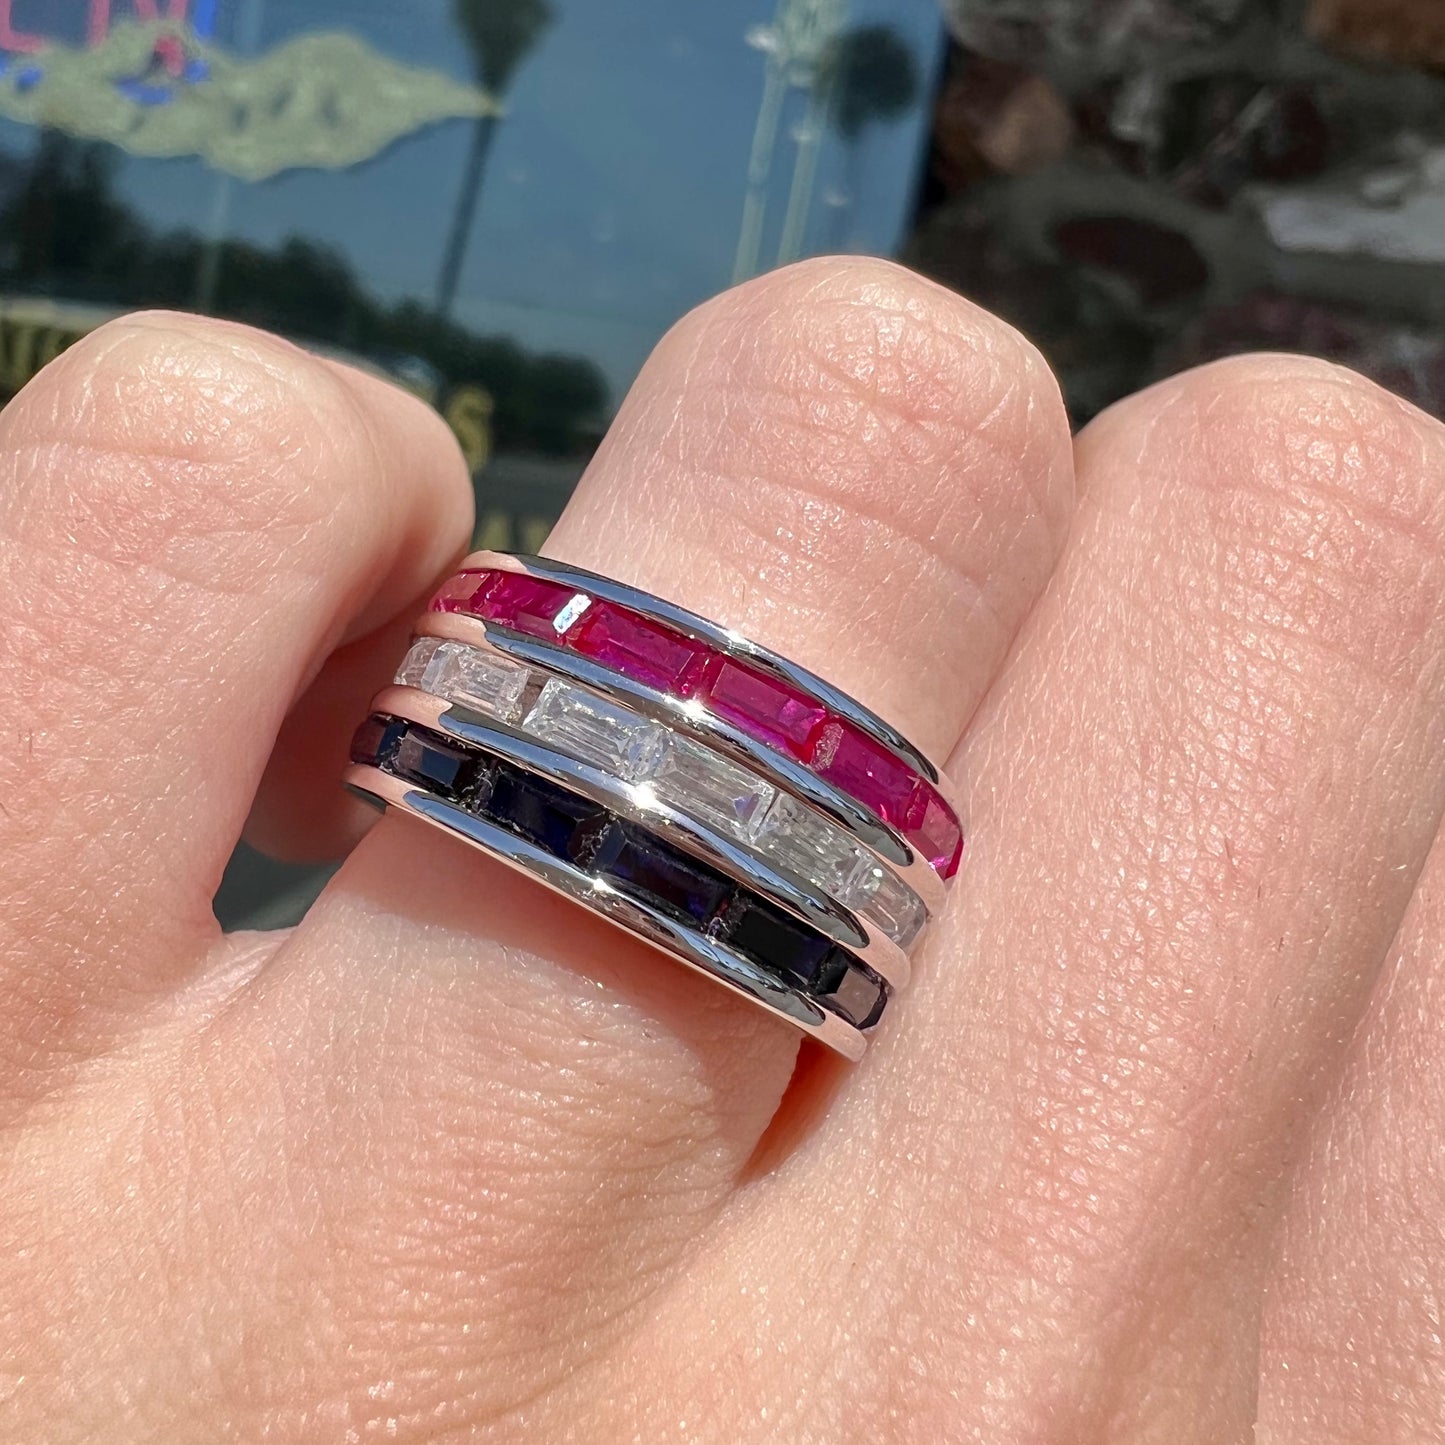 A silver ring set with red, white, and blue baguette cut stones.  The gallery features two stars.